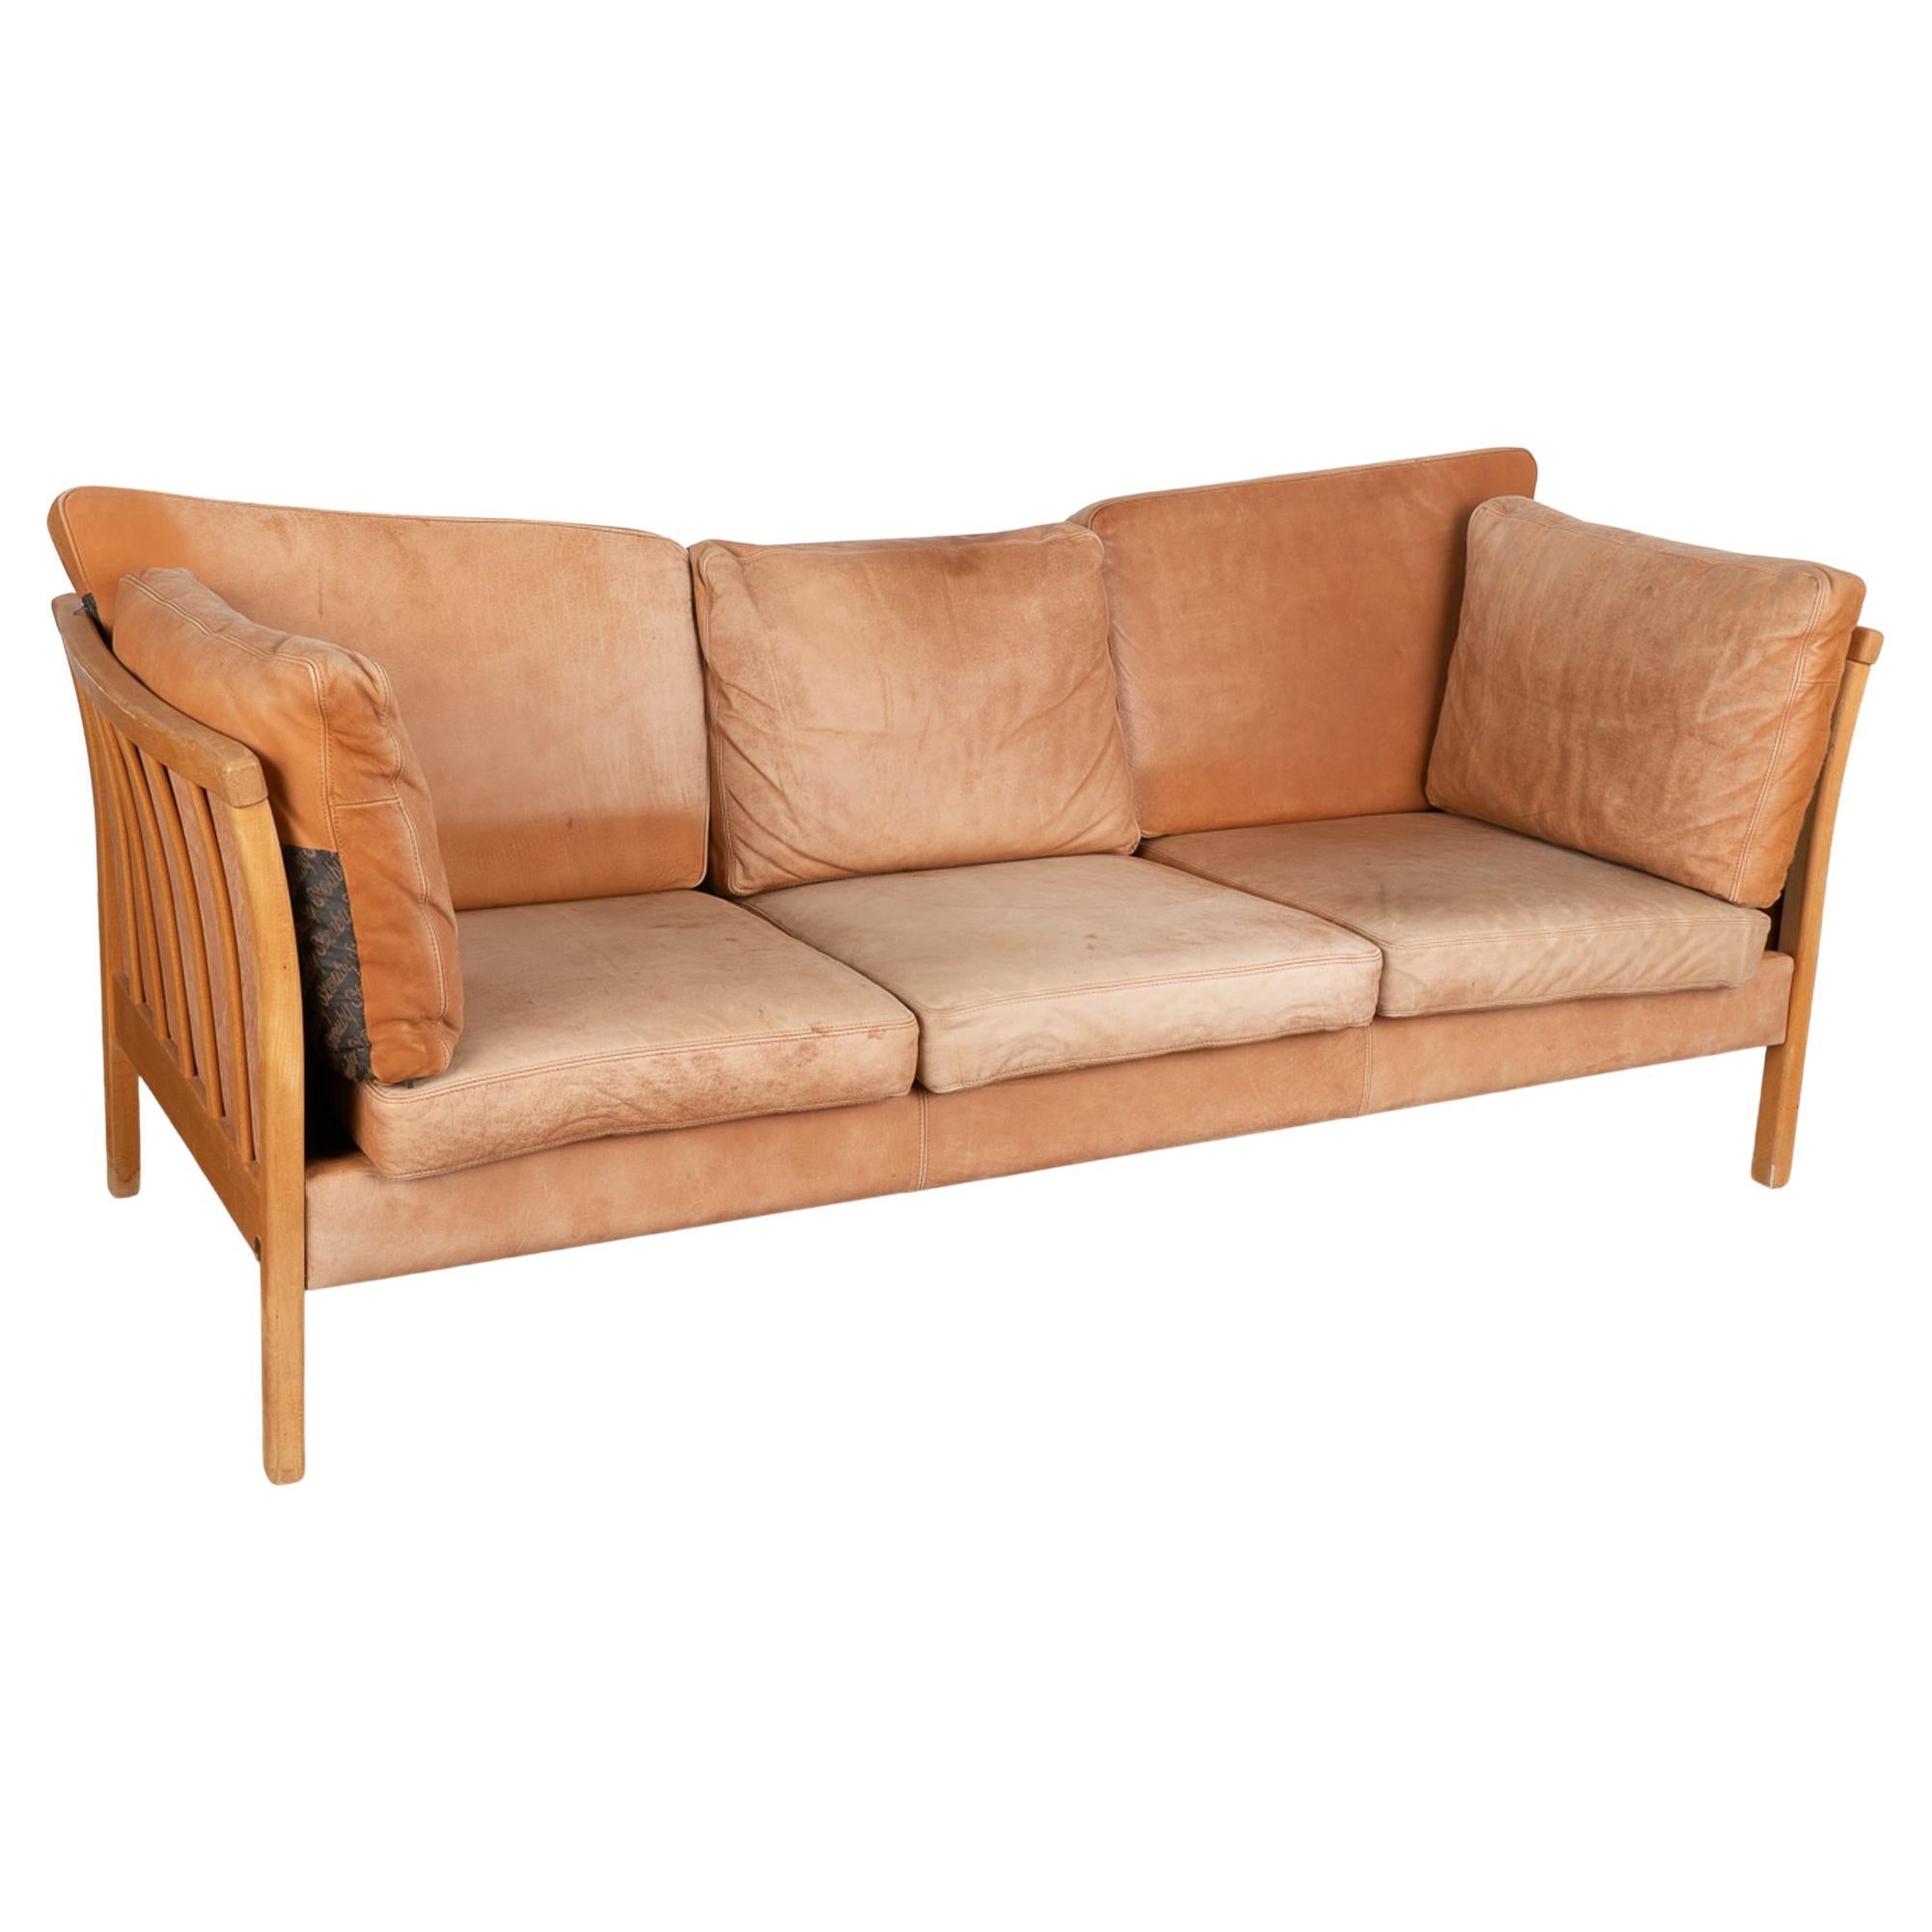 Mid-Century Modern 3 Seat Vintage Leather Sofa by Stouby of Denmark, circa 1970 For Sale